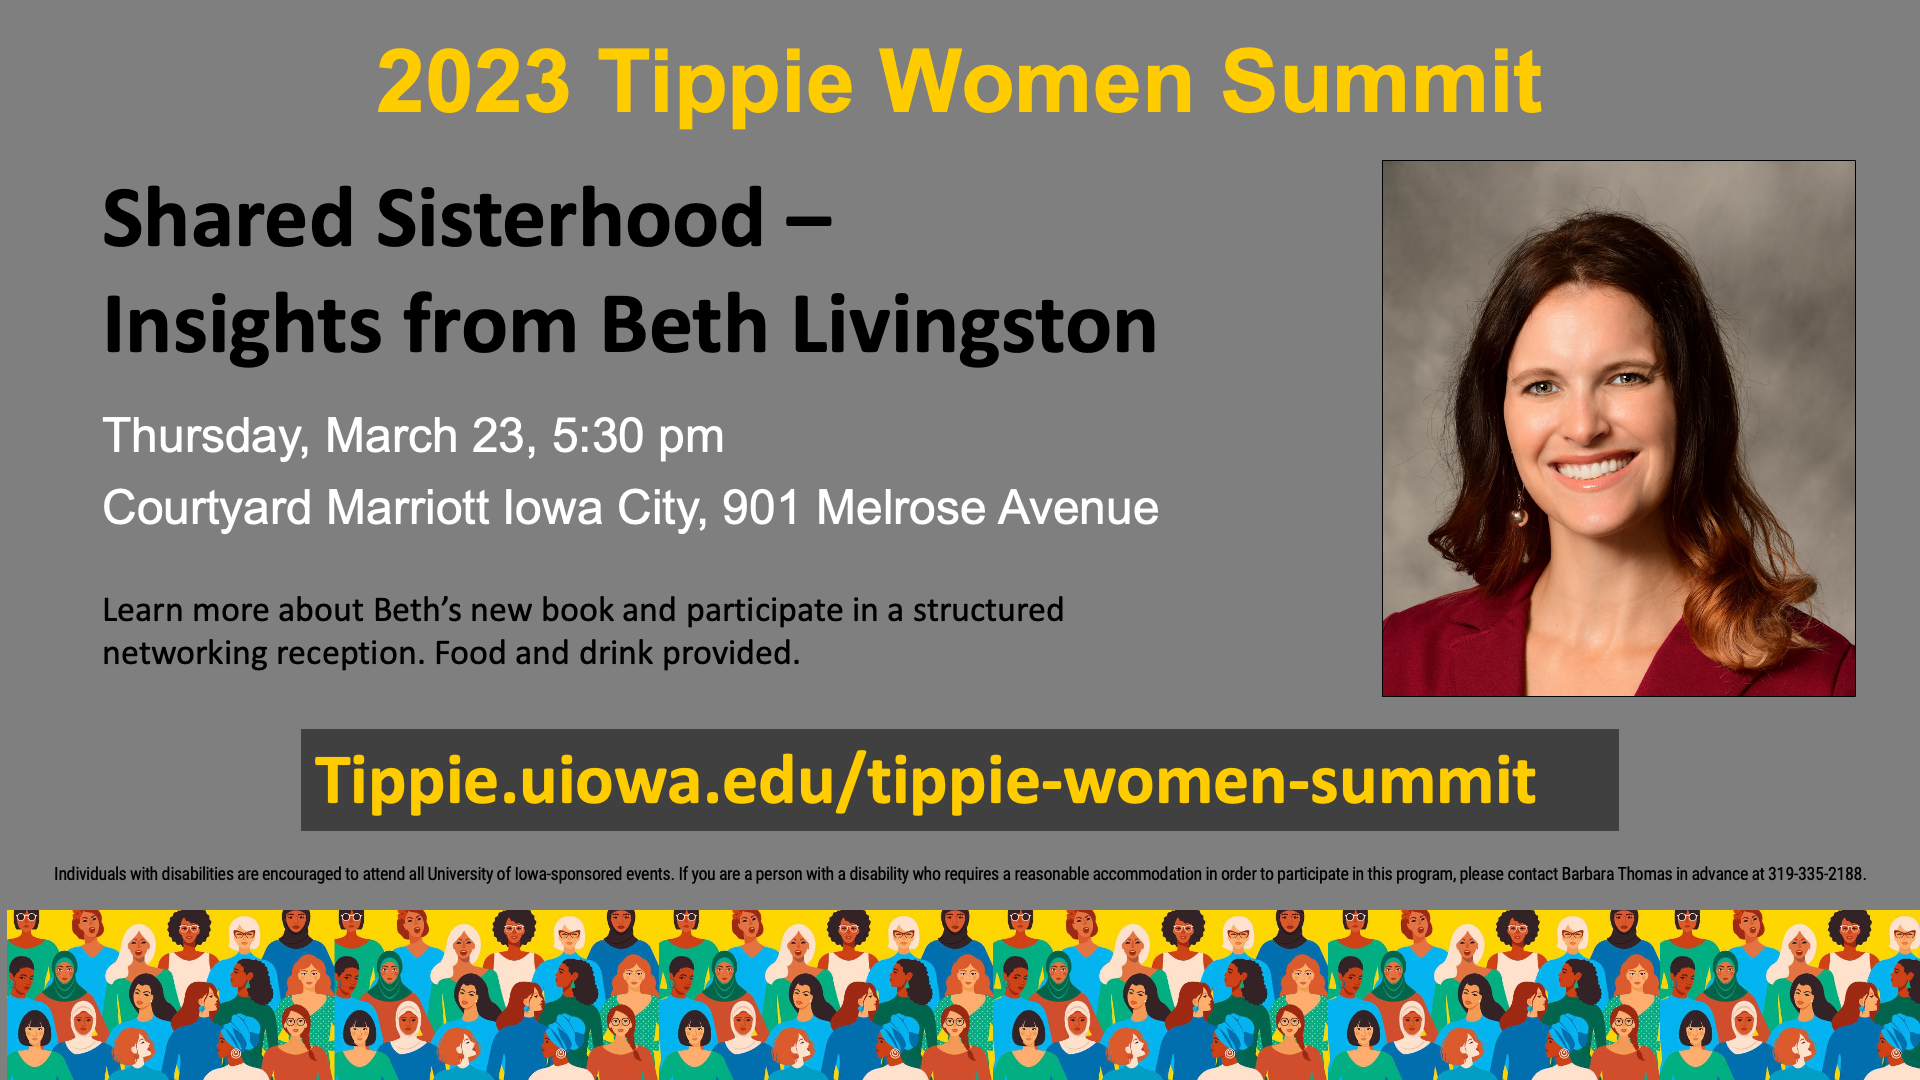 Shared Sisterhood - Insights from Beth Livingston: Thursday March 23, 5:30 PM